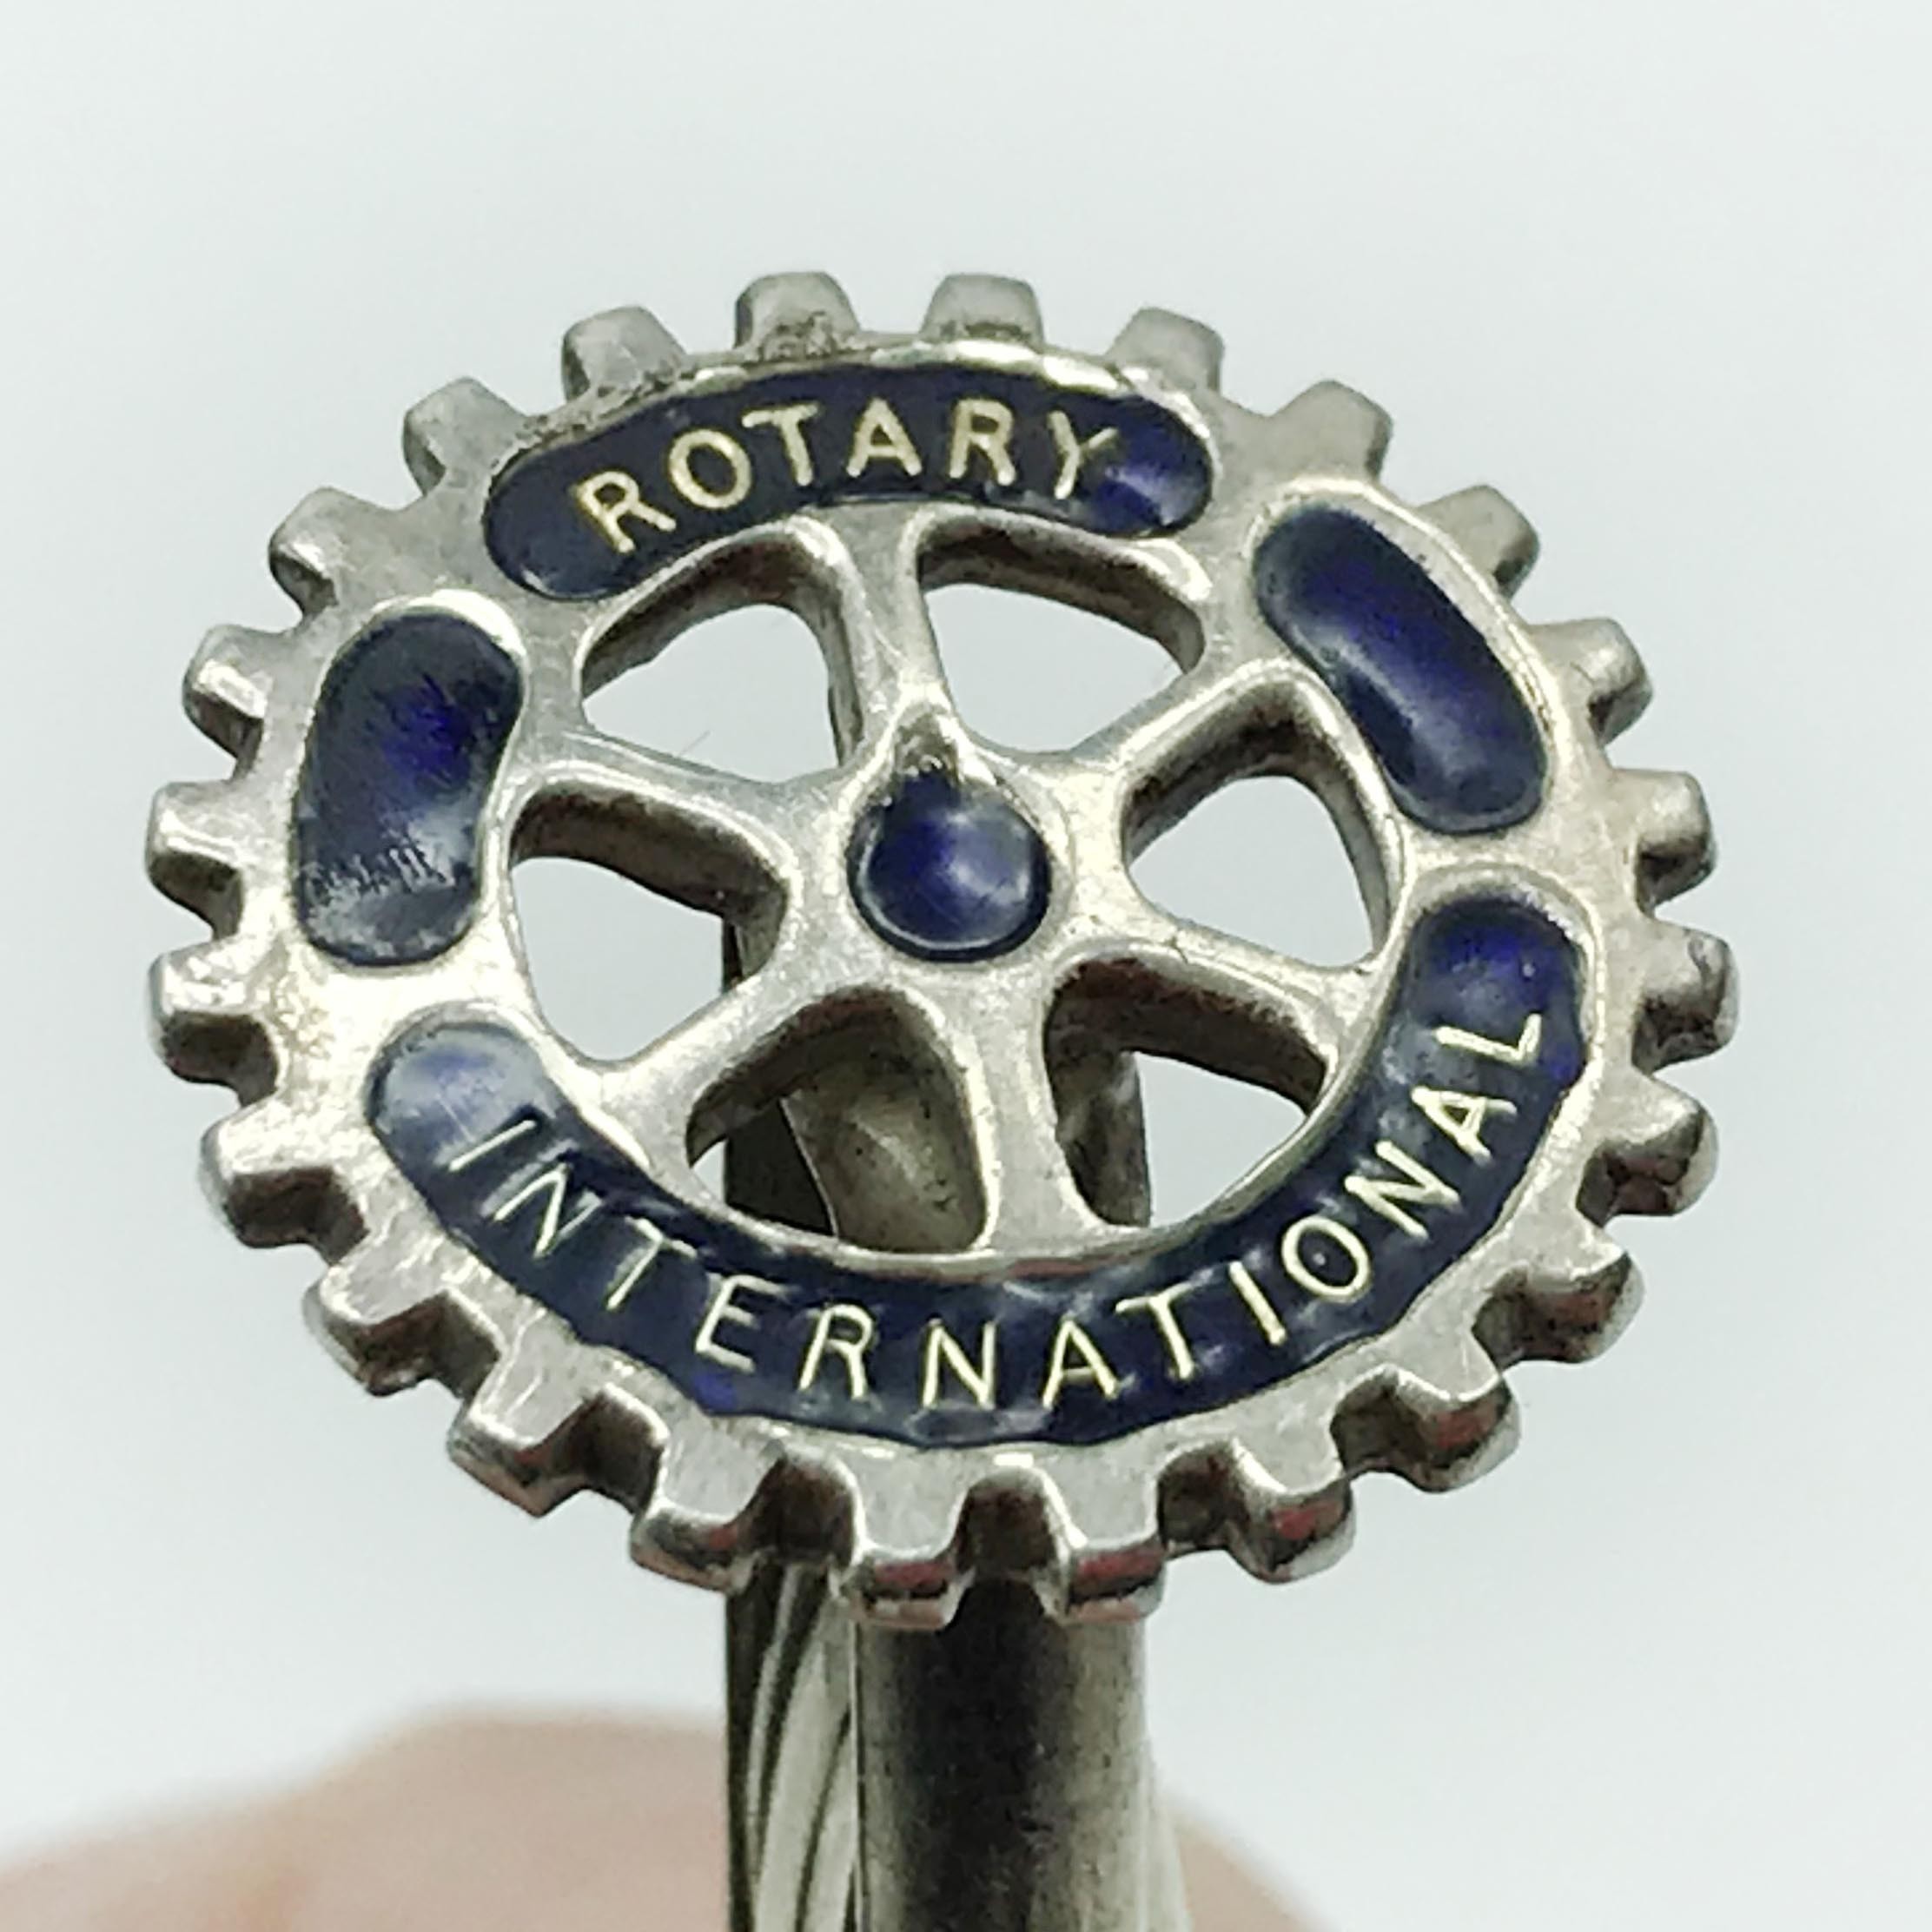 TWO ROTARY INTERNATIONAL MEDALS & A PAIR OF ROTARY CUFF-LINKS ALL HALLMARKED SILVER - Image 3 of 10